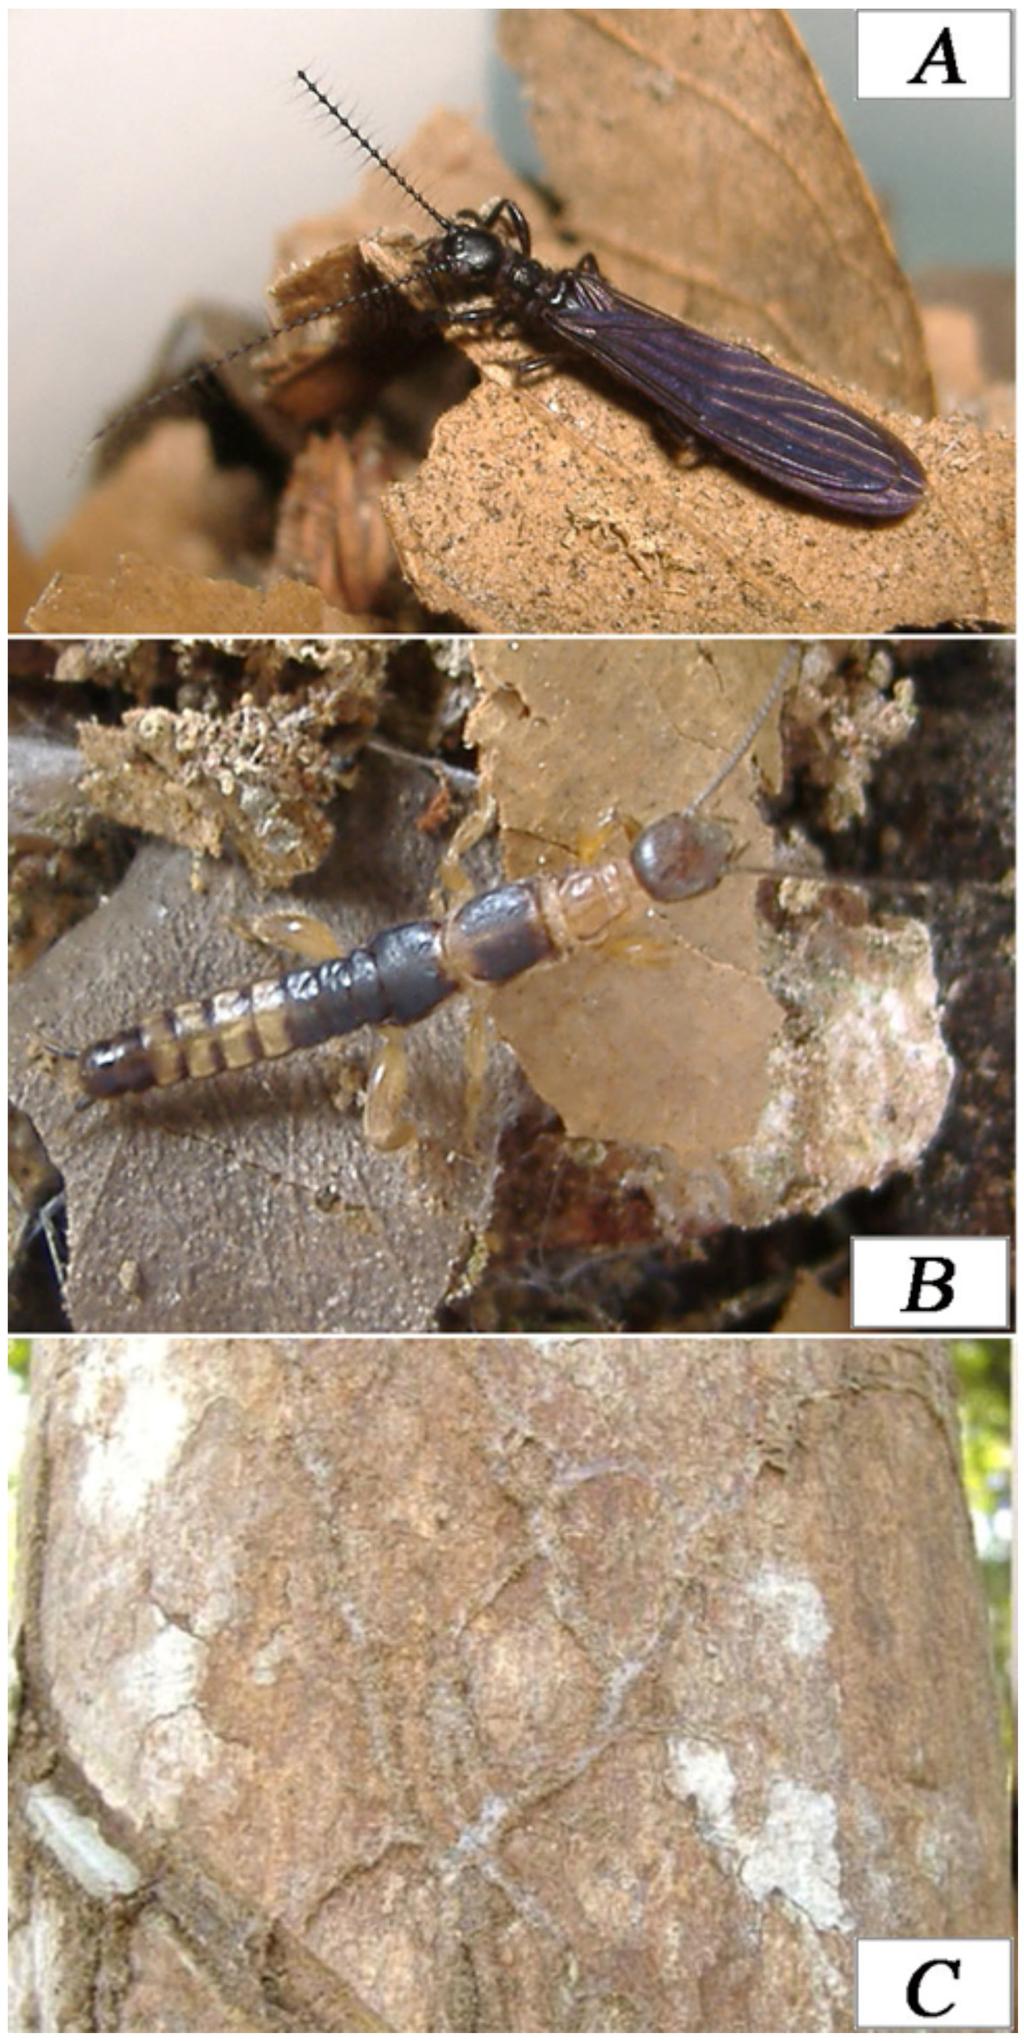 FIGURE 5. Ptilocerembia rossi sp. n. (A) male, (B) female and (C) silk gallery.